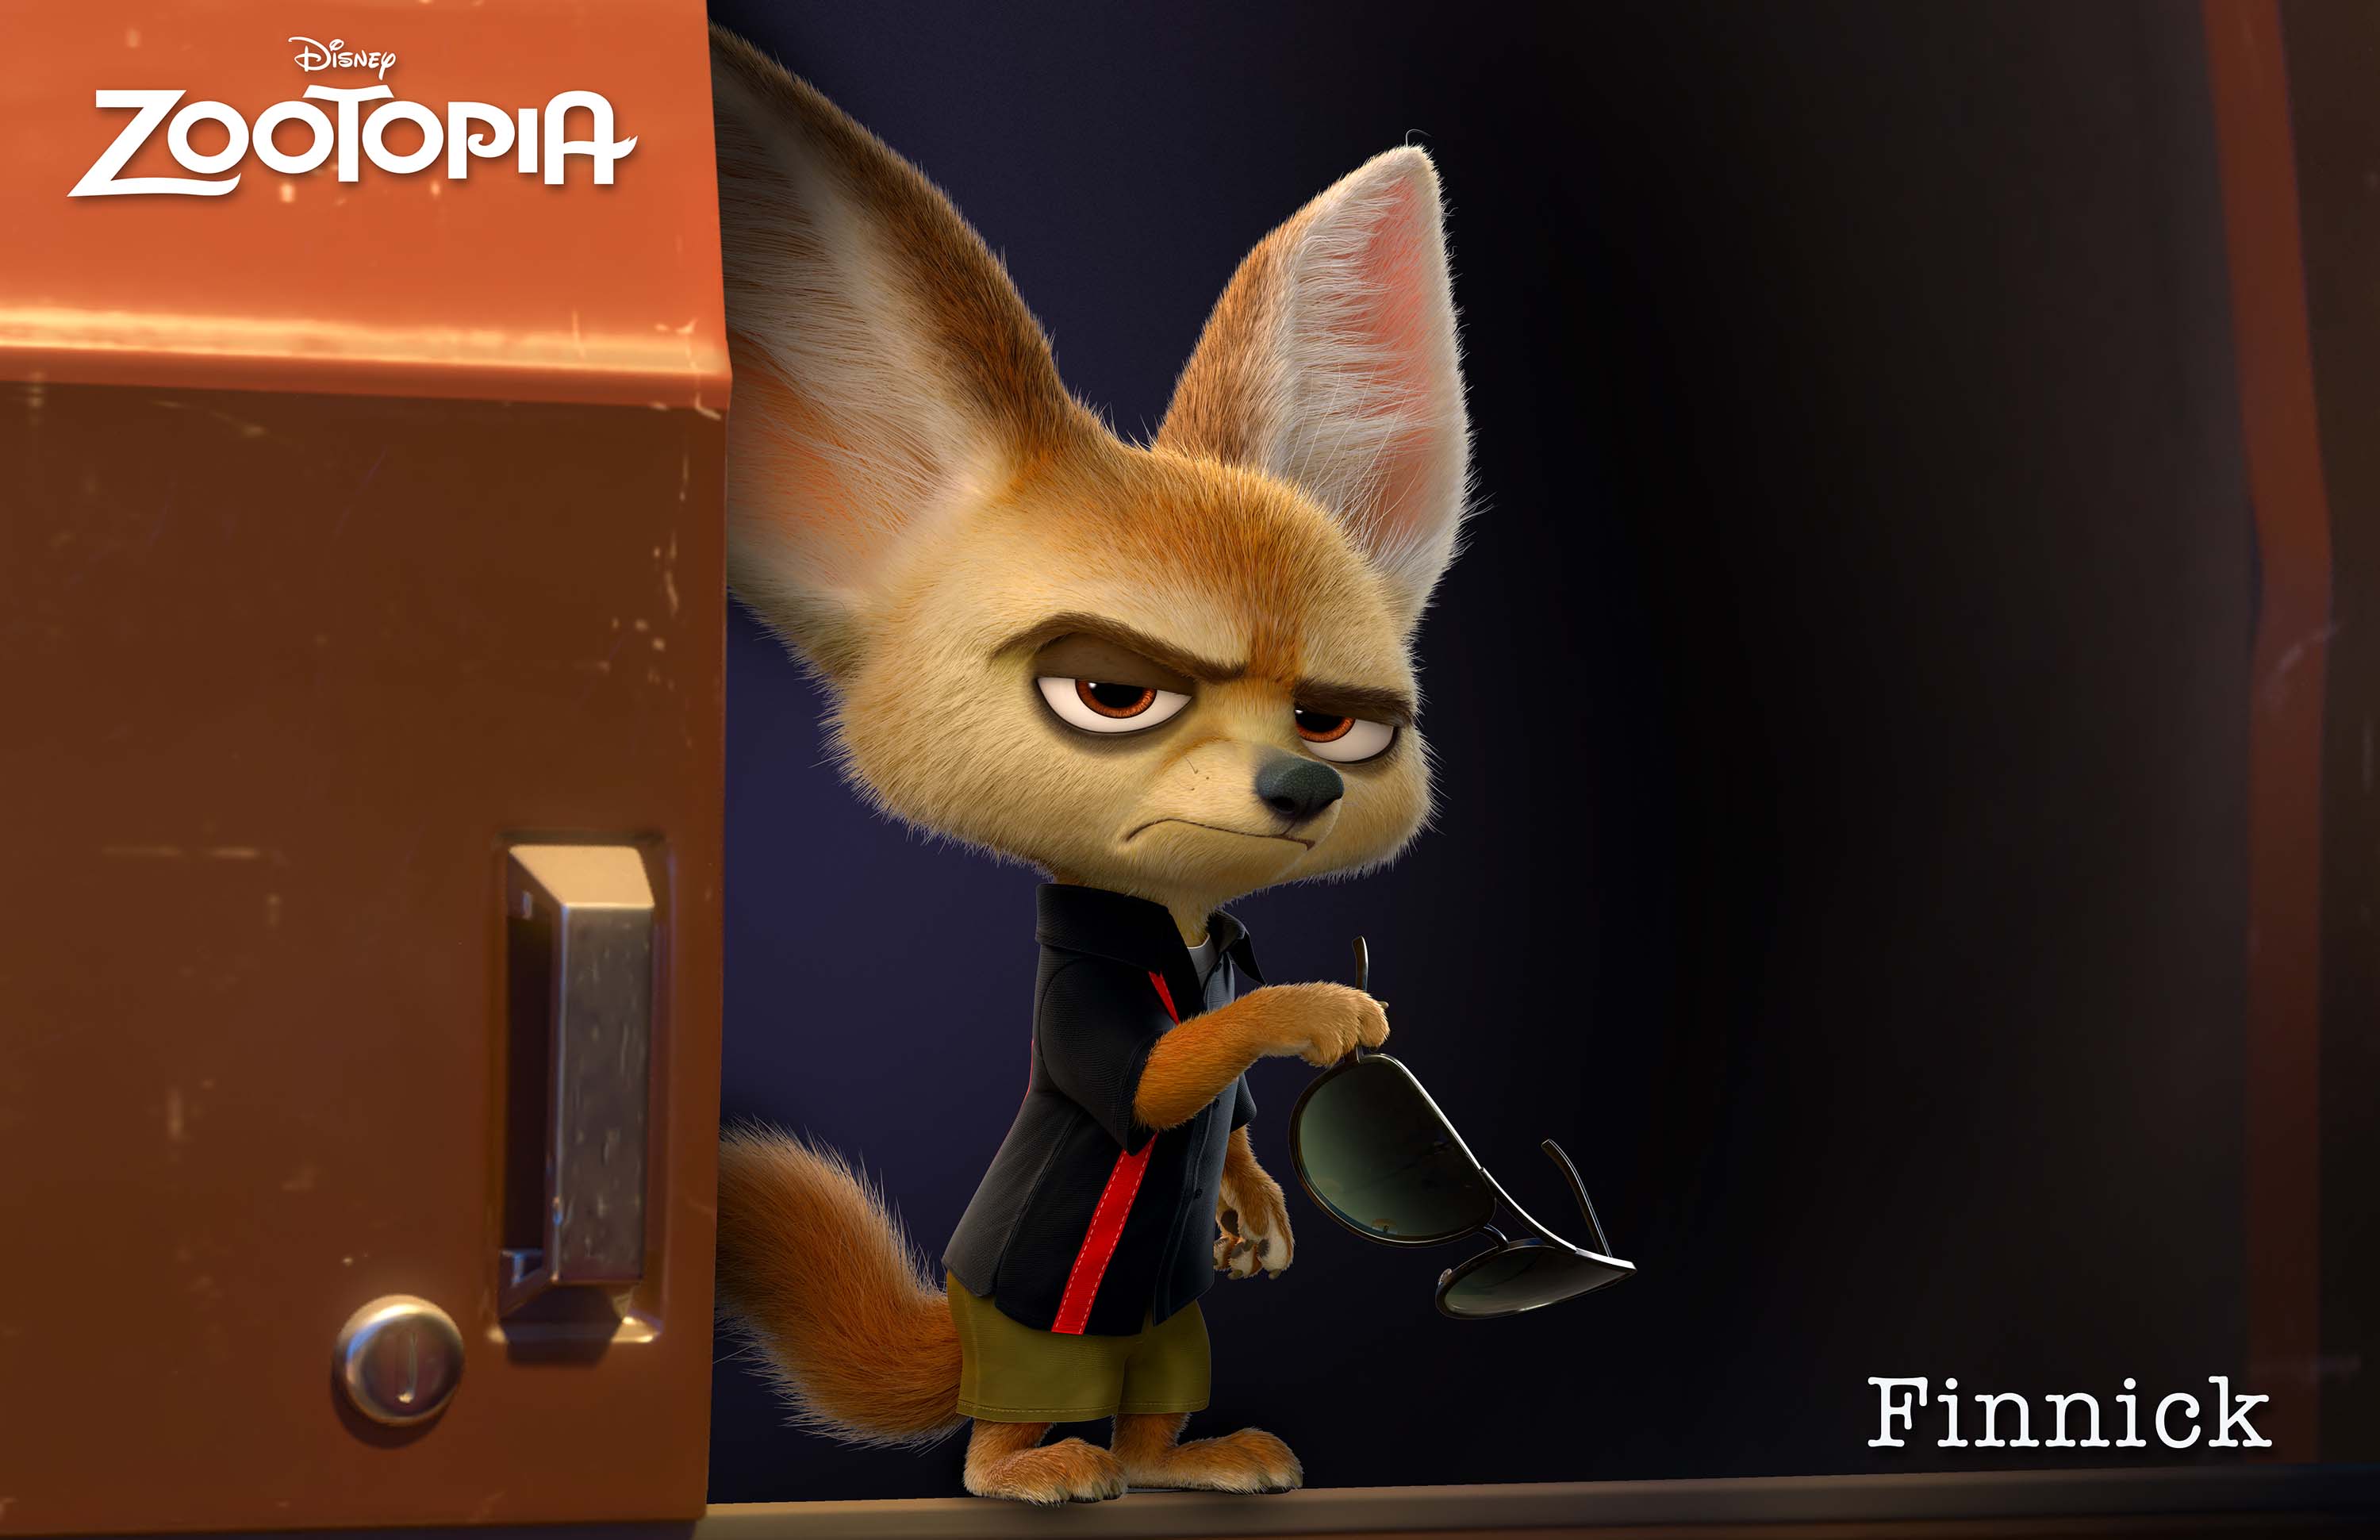 ZOOTOPIA â€“ FINNICK, a fennec fox with a big chip on his adorable shoulder. Â©2015 Disney. All Rights Reserved.